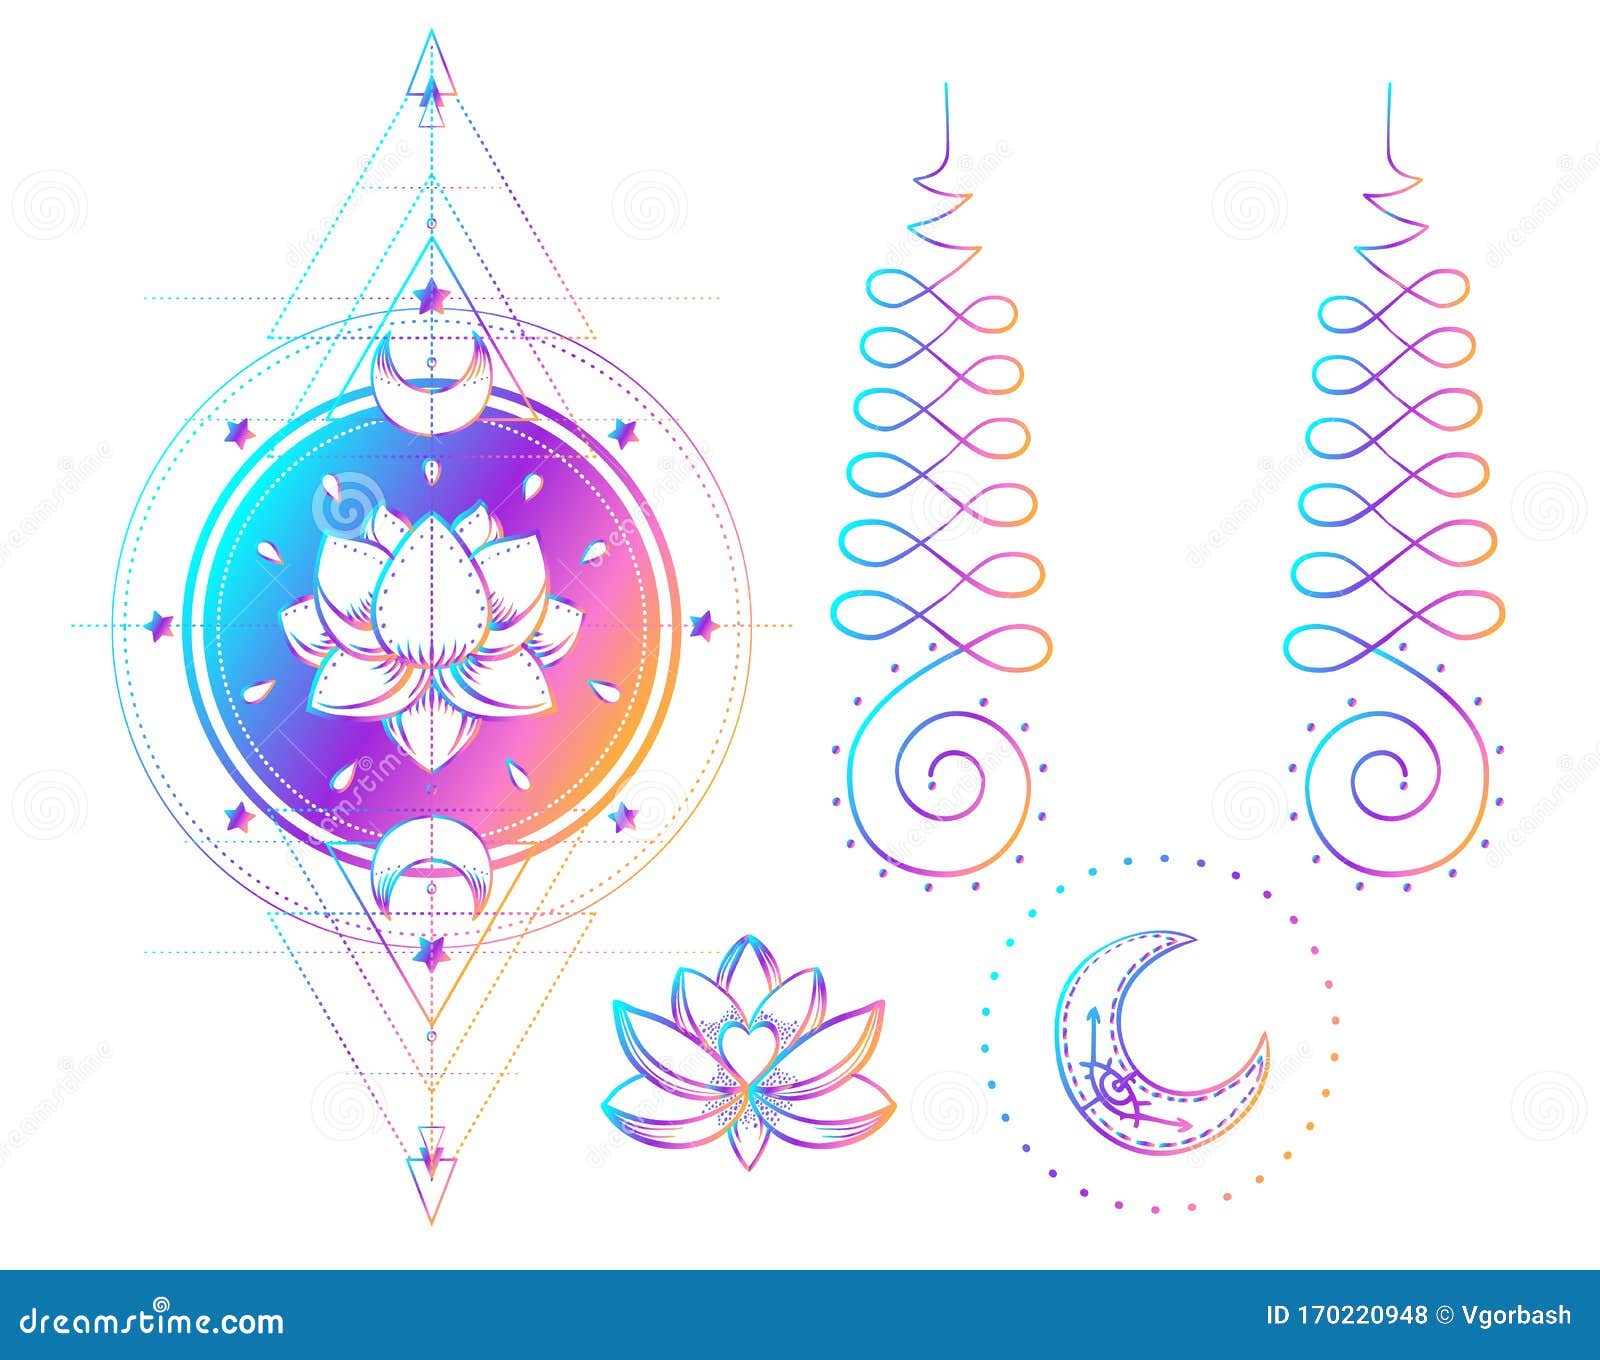 Sacred Geometry and Boo symbol set. Ayurveda sign of harmony and balance.  Tattoo design, yoga logo. poster, t-shirt. Colorful gradient over black.  Astrology, esoteric, religion. Stock Vector by ©vgorbash 335199610